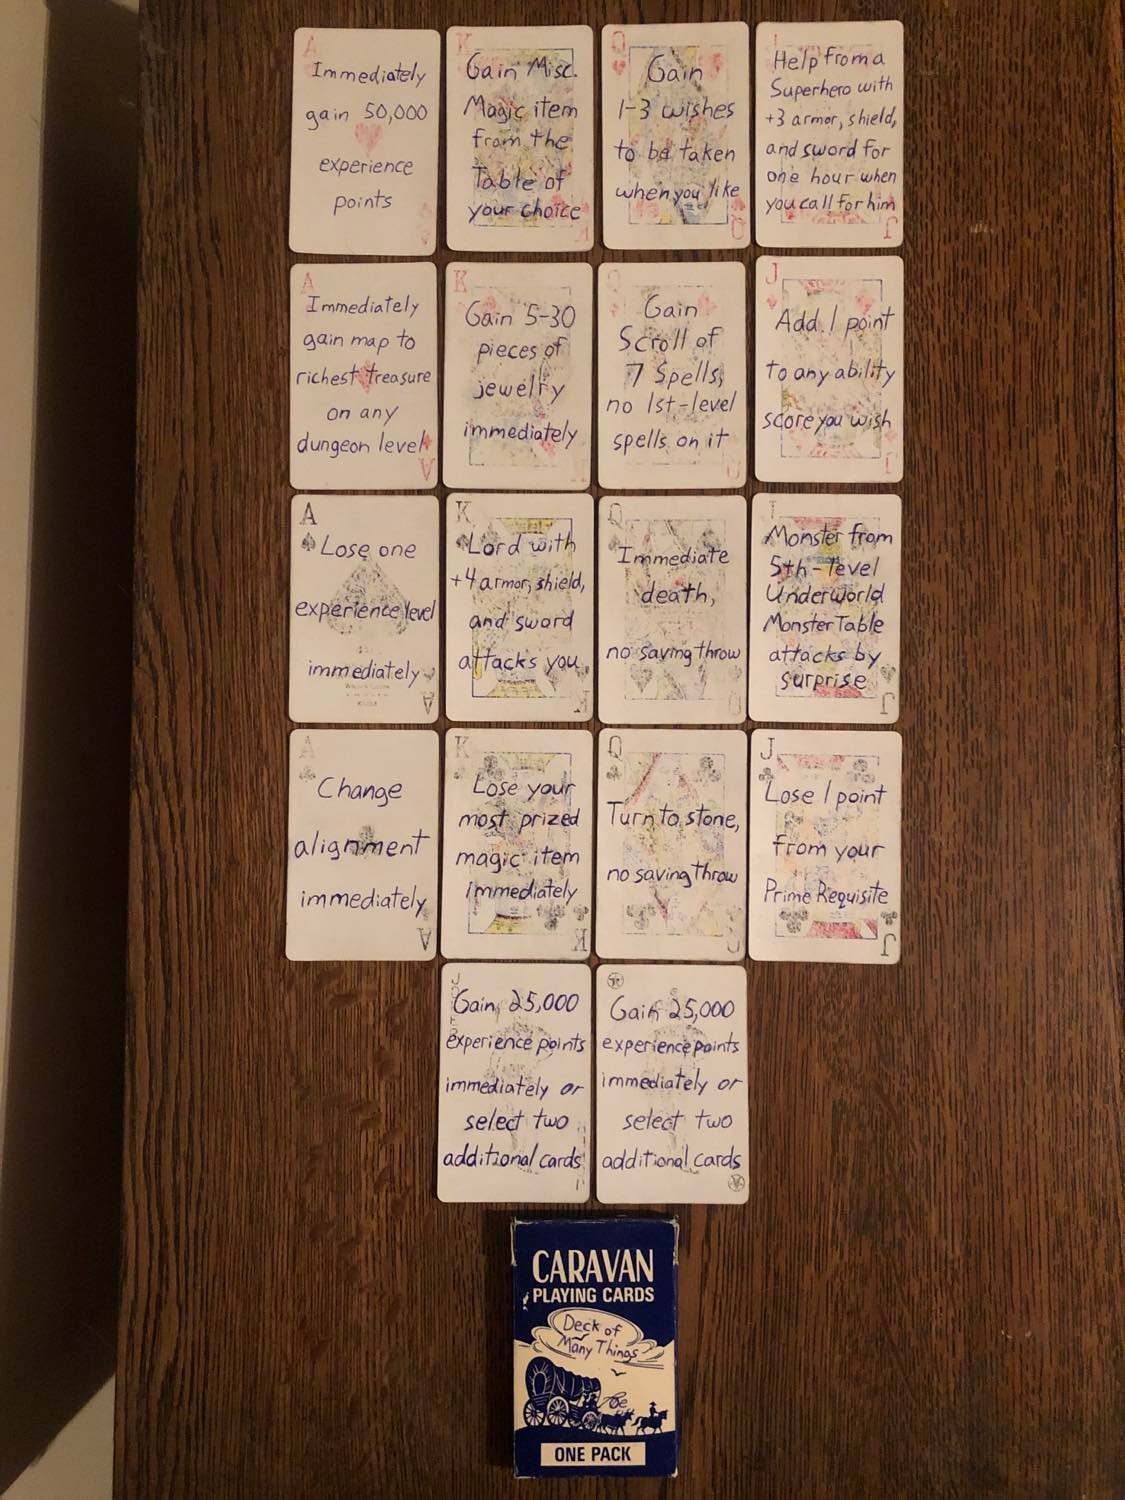 All of the cards laid out, four in a row, each suit, followed by the jokers and then the box. All of the card faces are mostly erased, though you can stil see what card it was. The text for each card is written in bold lettering, as mentioned throughout, and it's just a very tidy looking image.